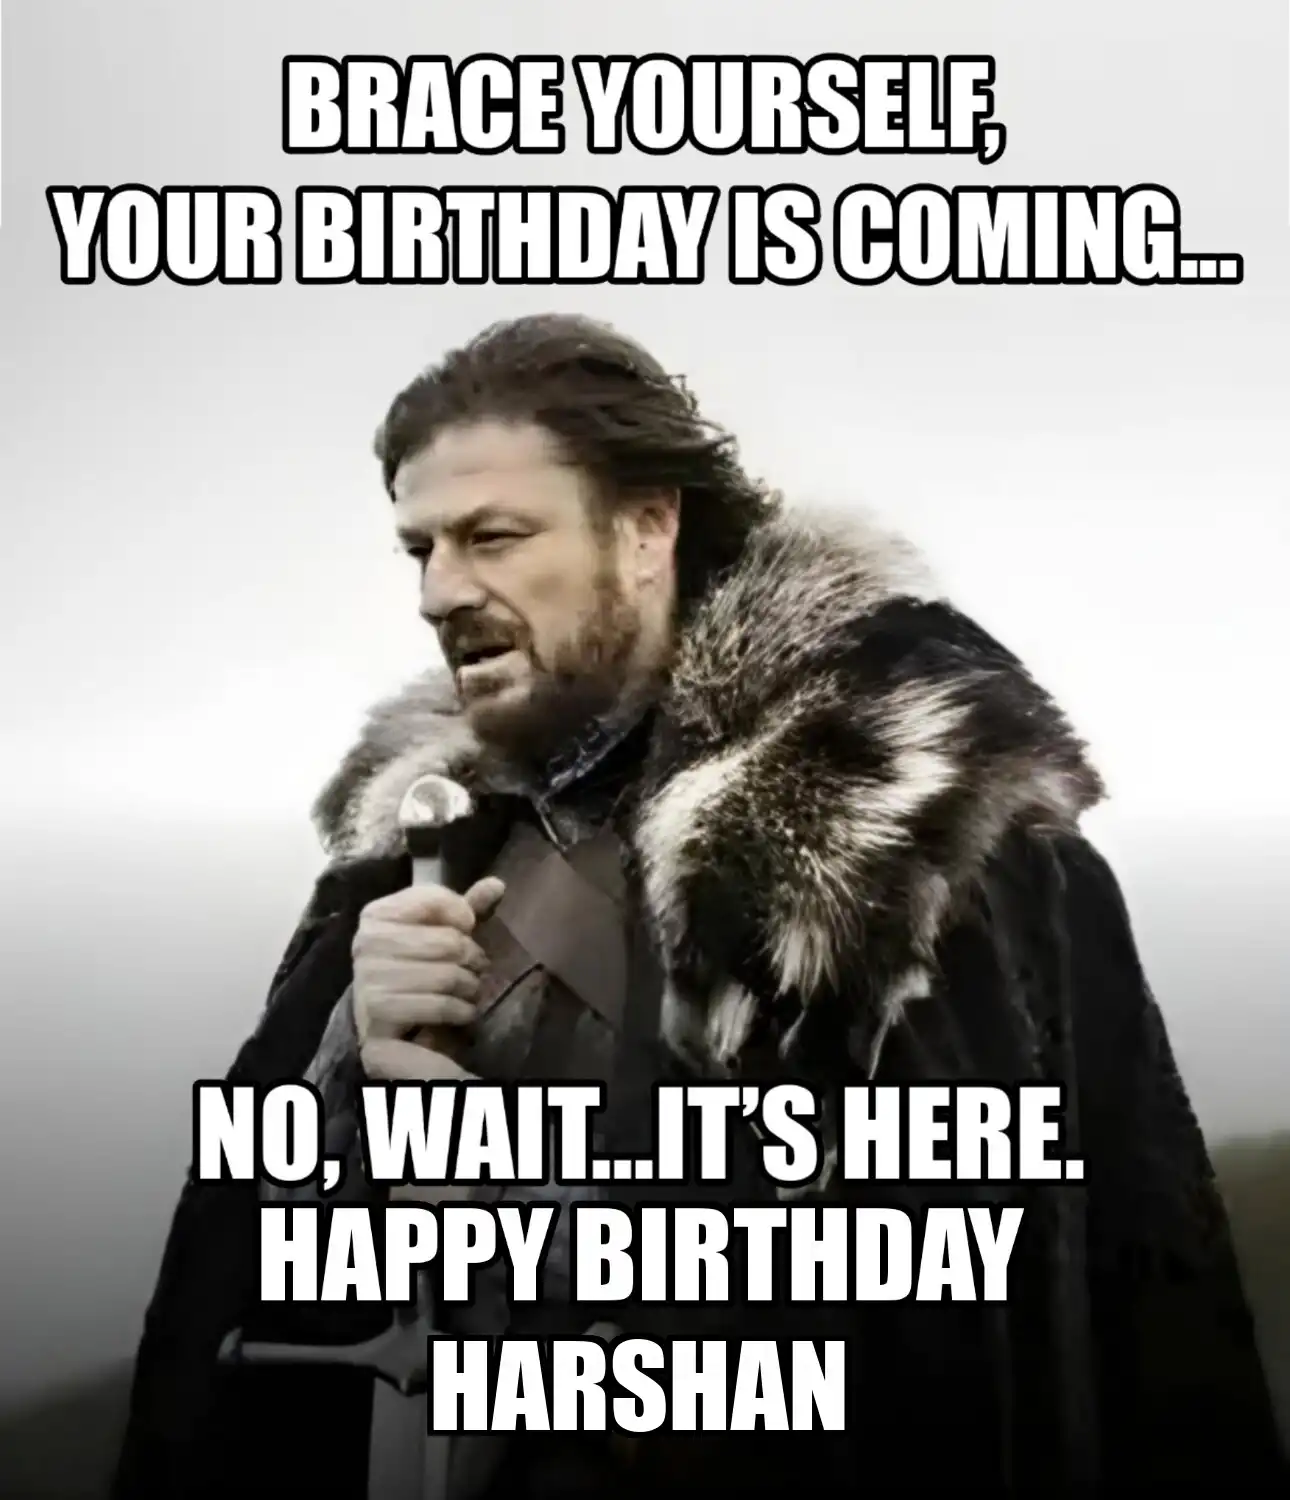 Happy Birthday Harshan Brace Yourself Your Birthday Is Coming Meme